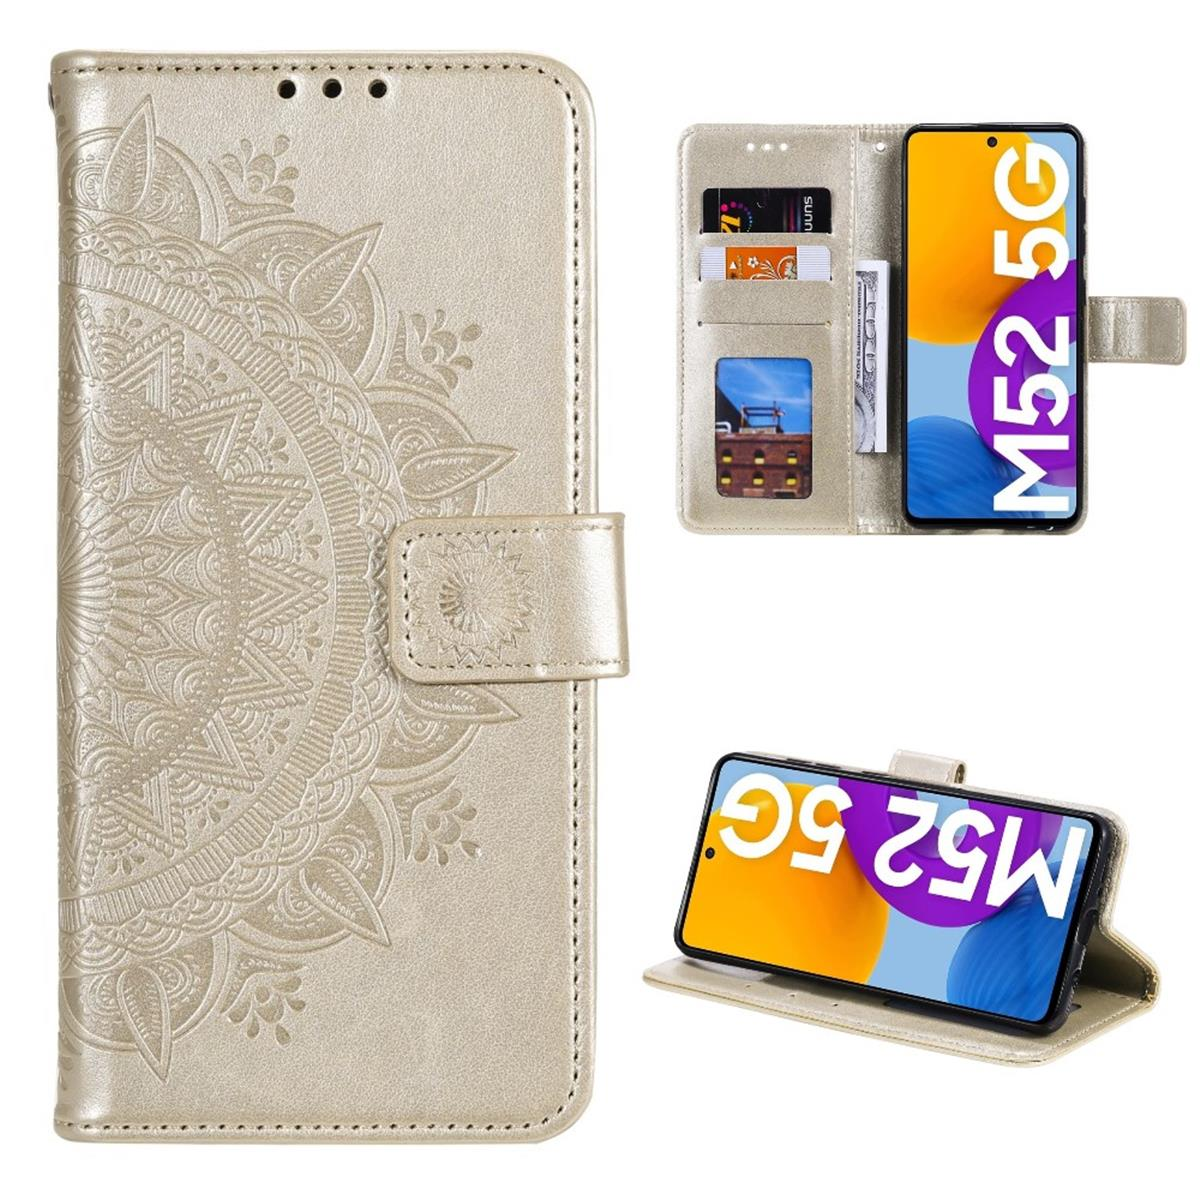 Mandala M52 COVERKINGZ Gold 5G, Galaxy Samsung, Muster, Klapphülle mit Bookcover,